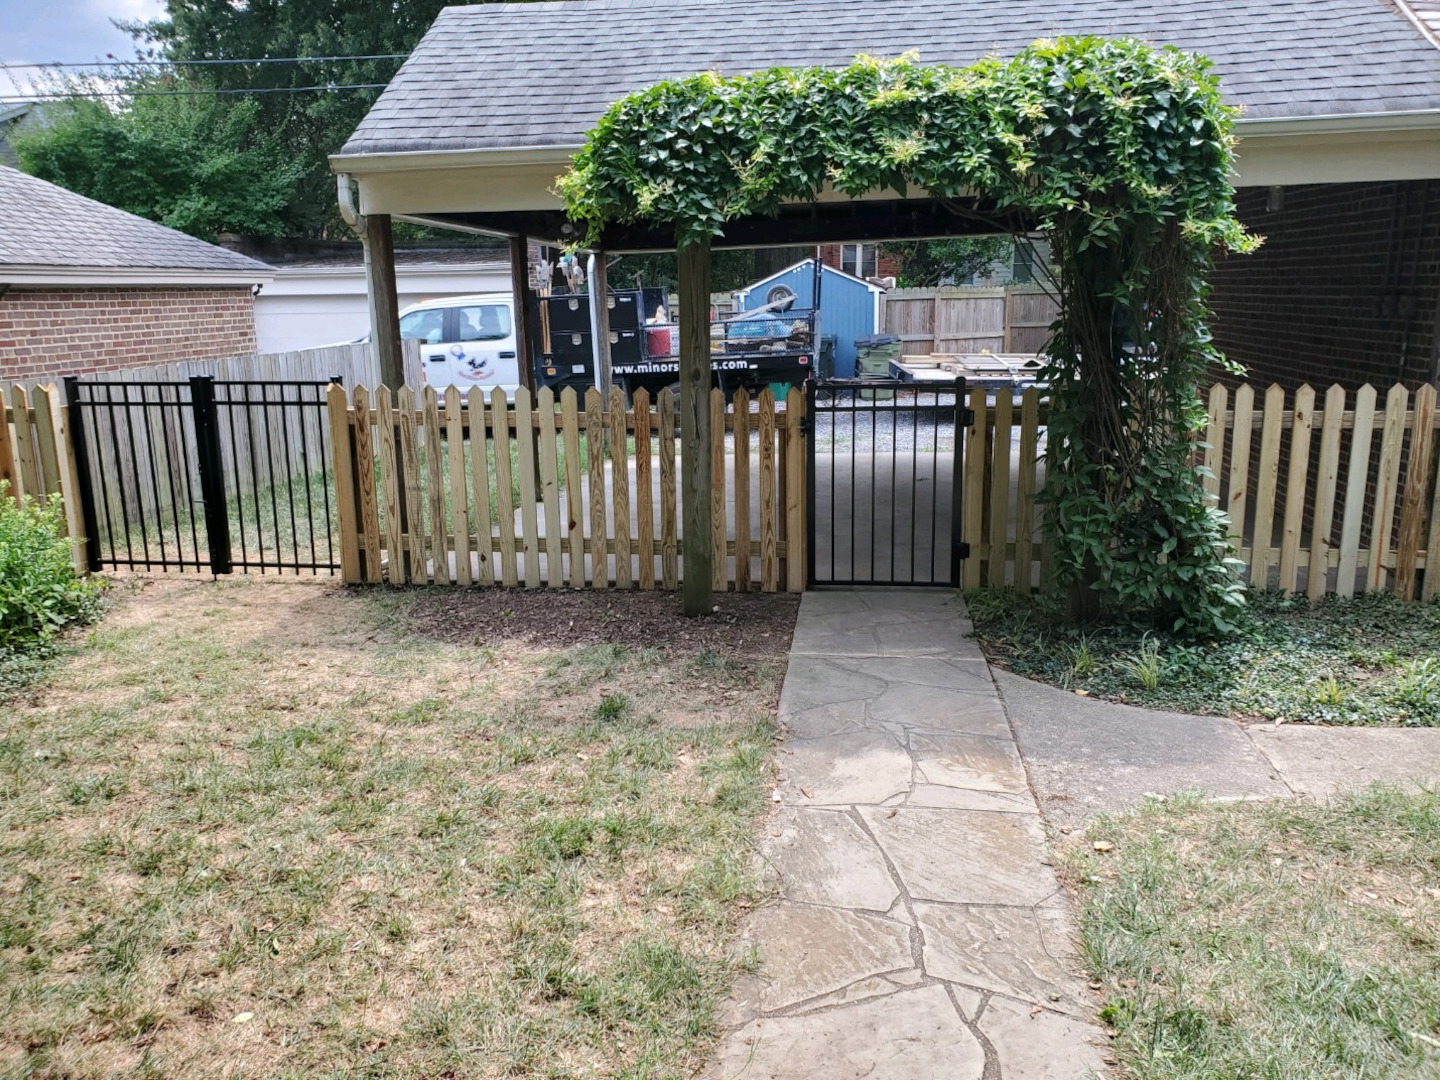 Four foot 45 degree pointed picket fence with aluminum gates.